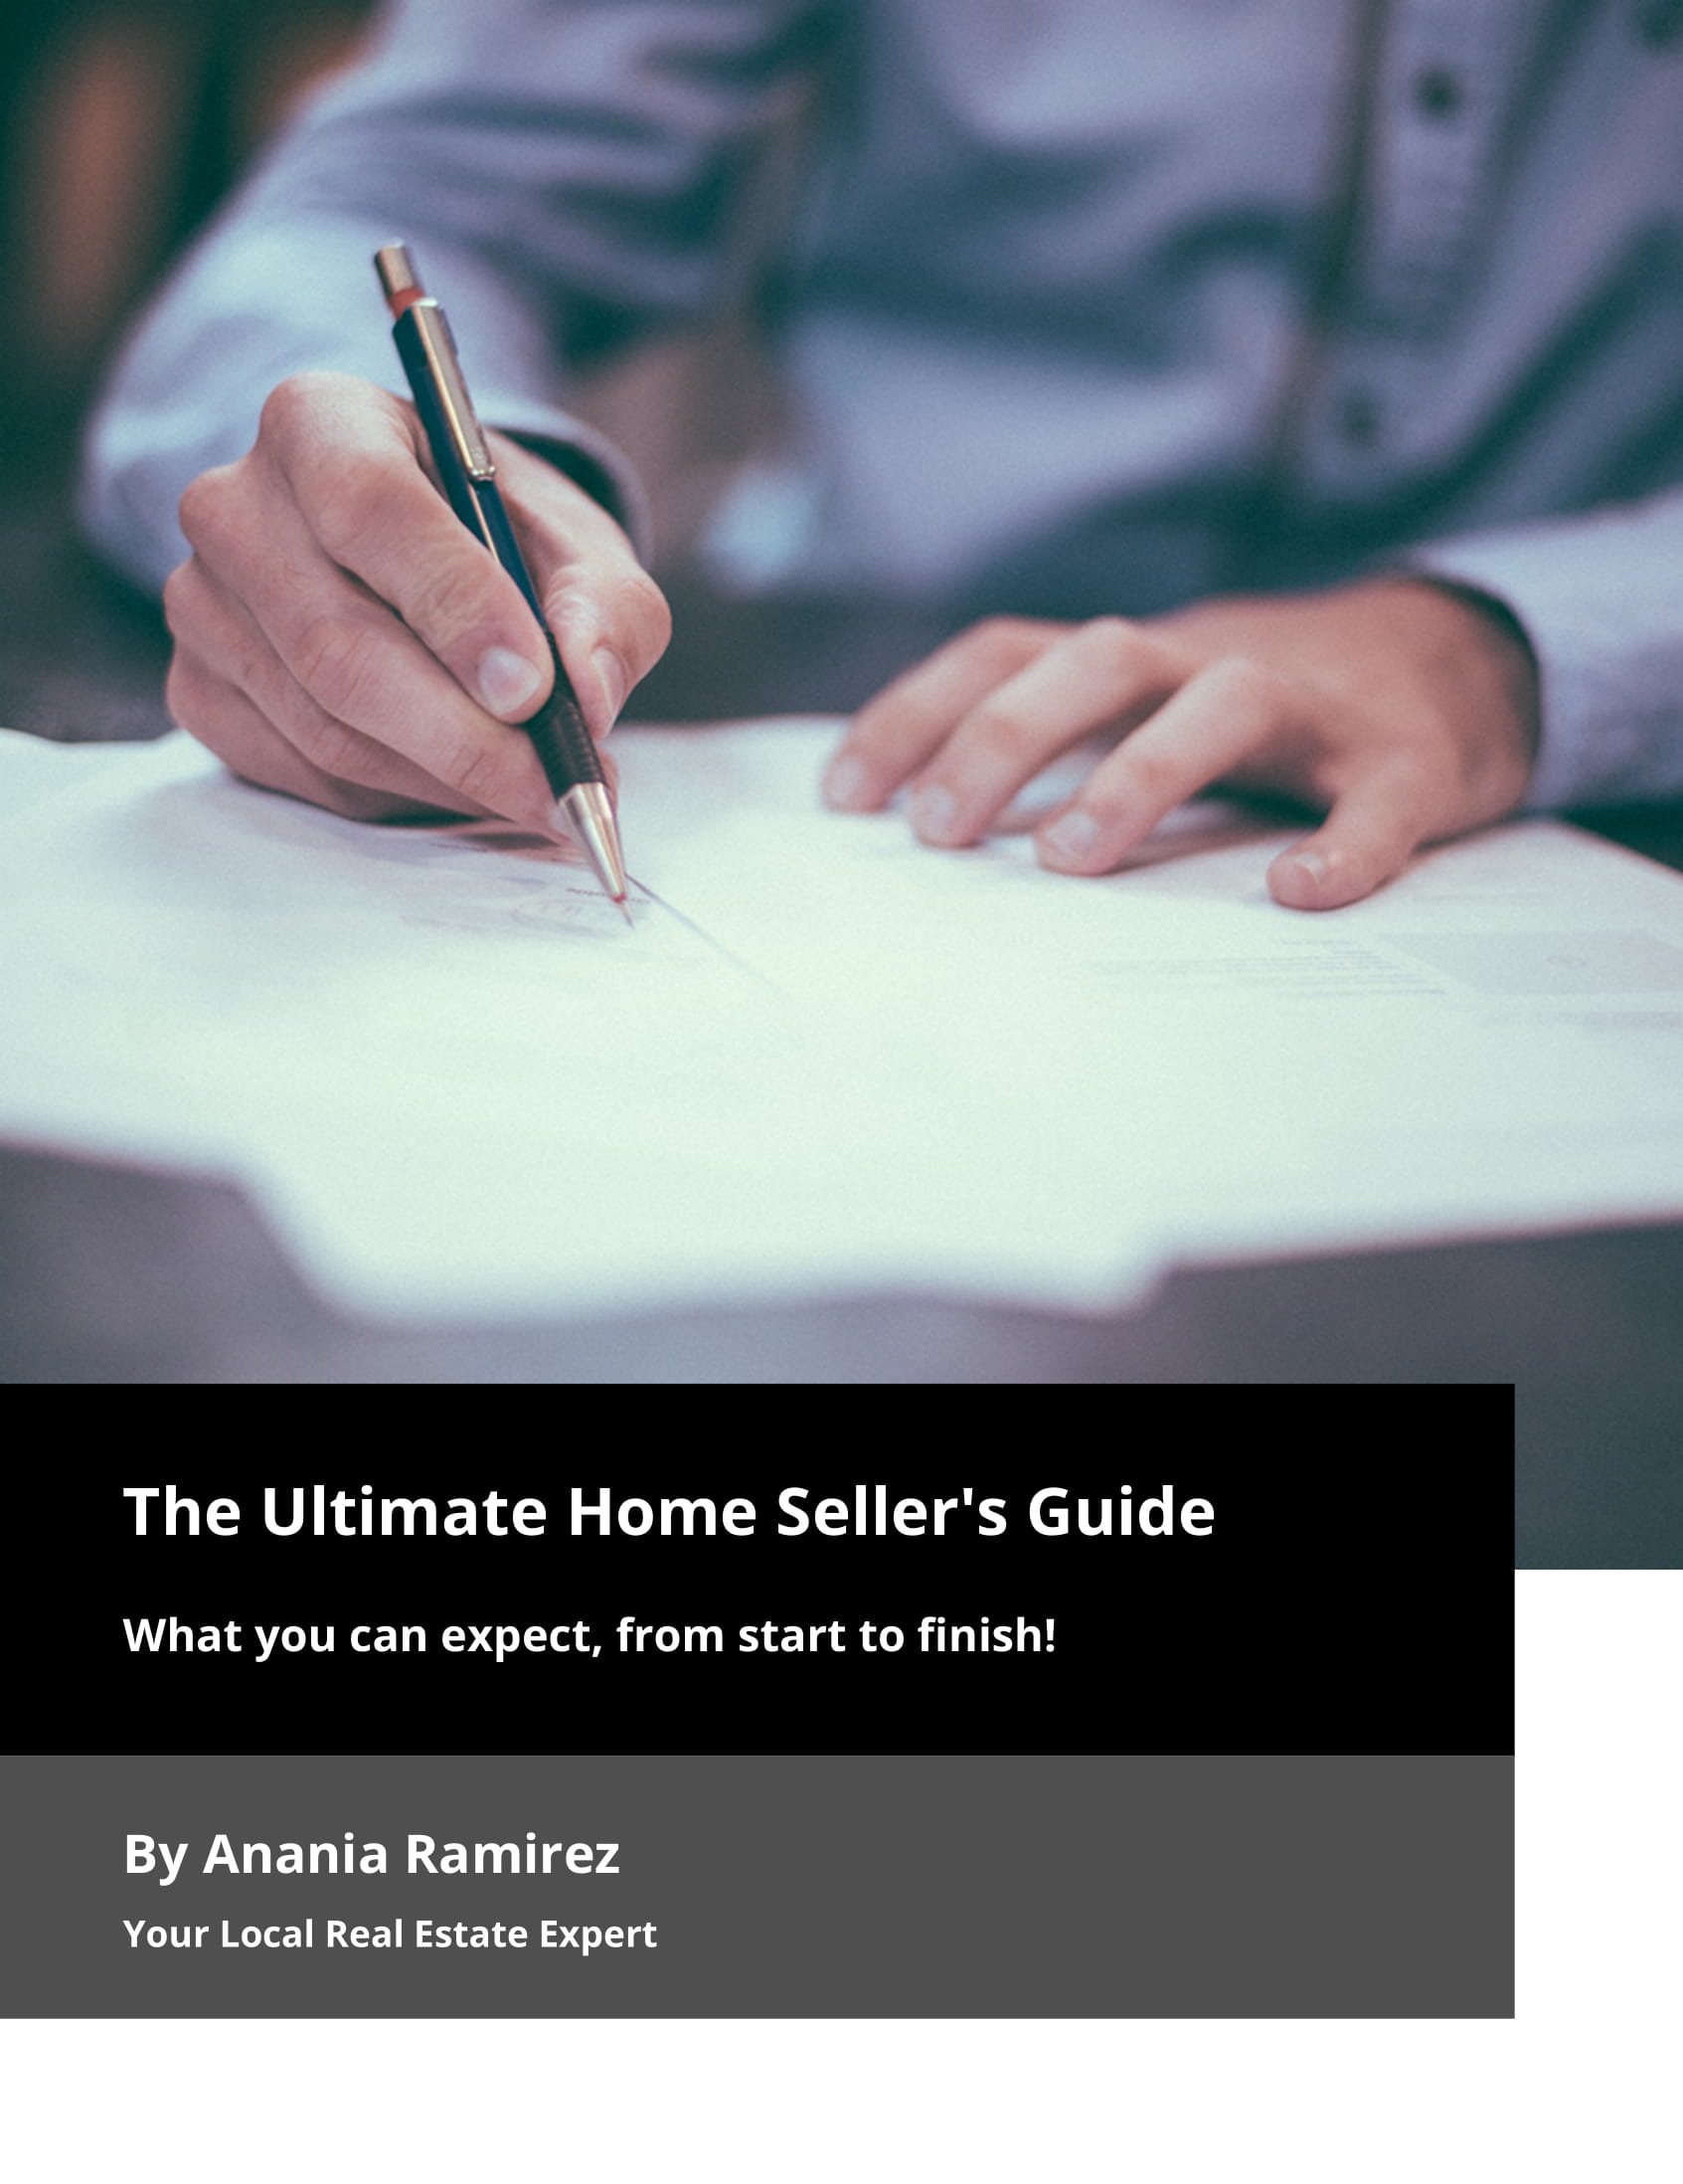 The Ultimate Home Seller's Guide